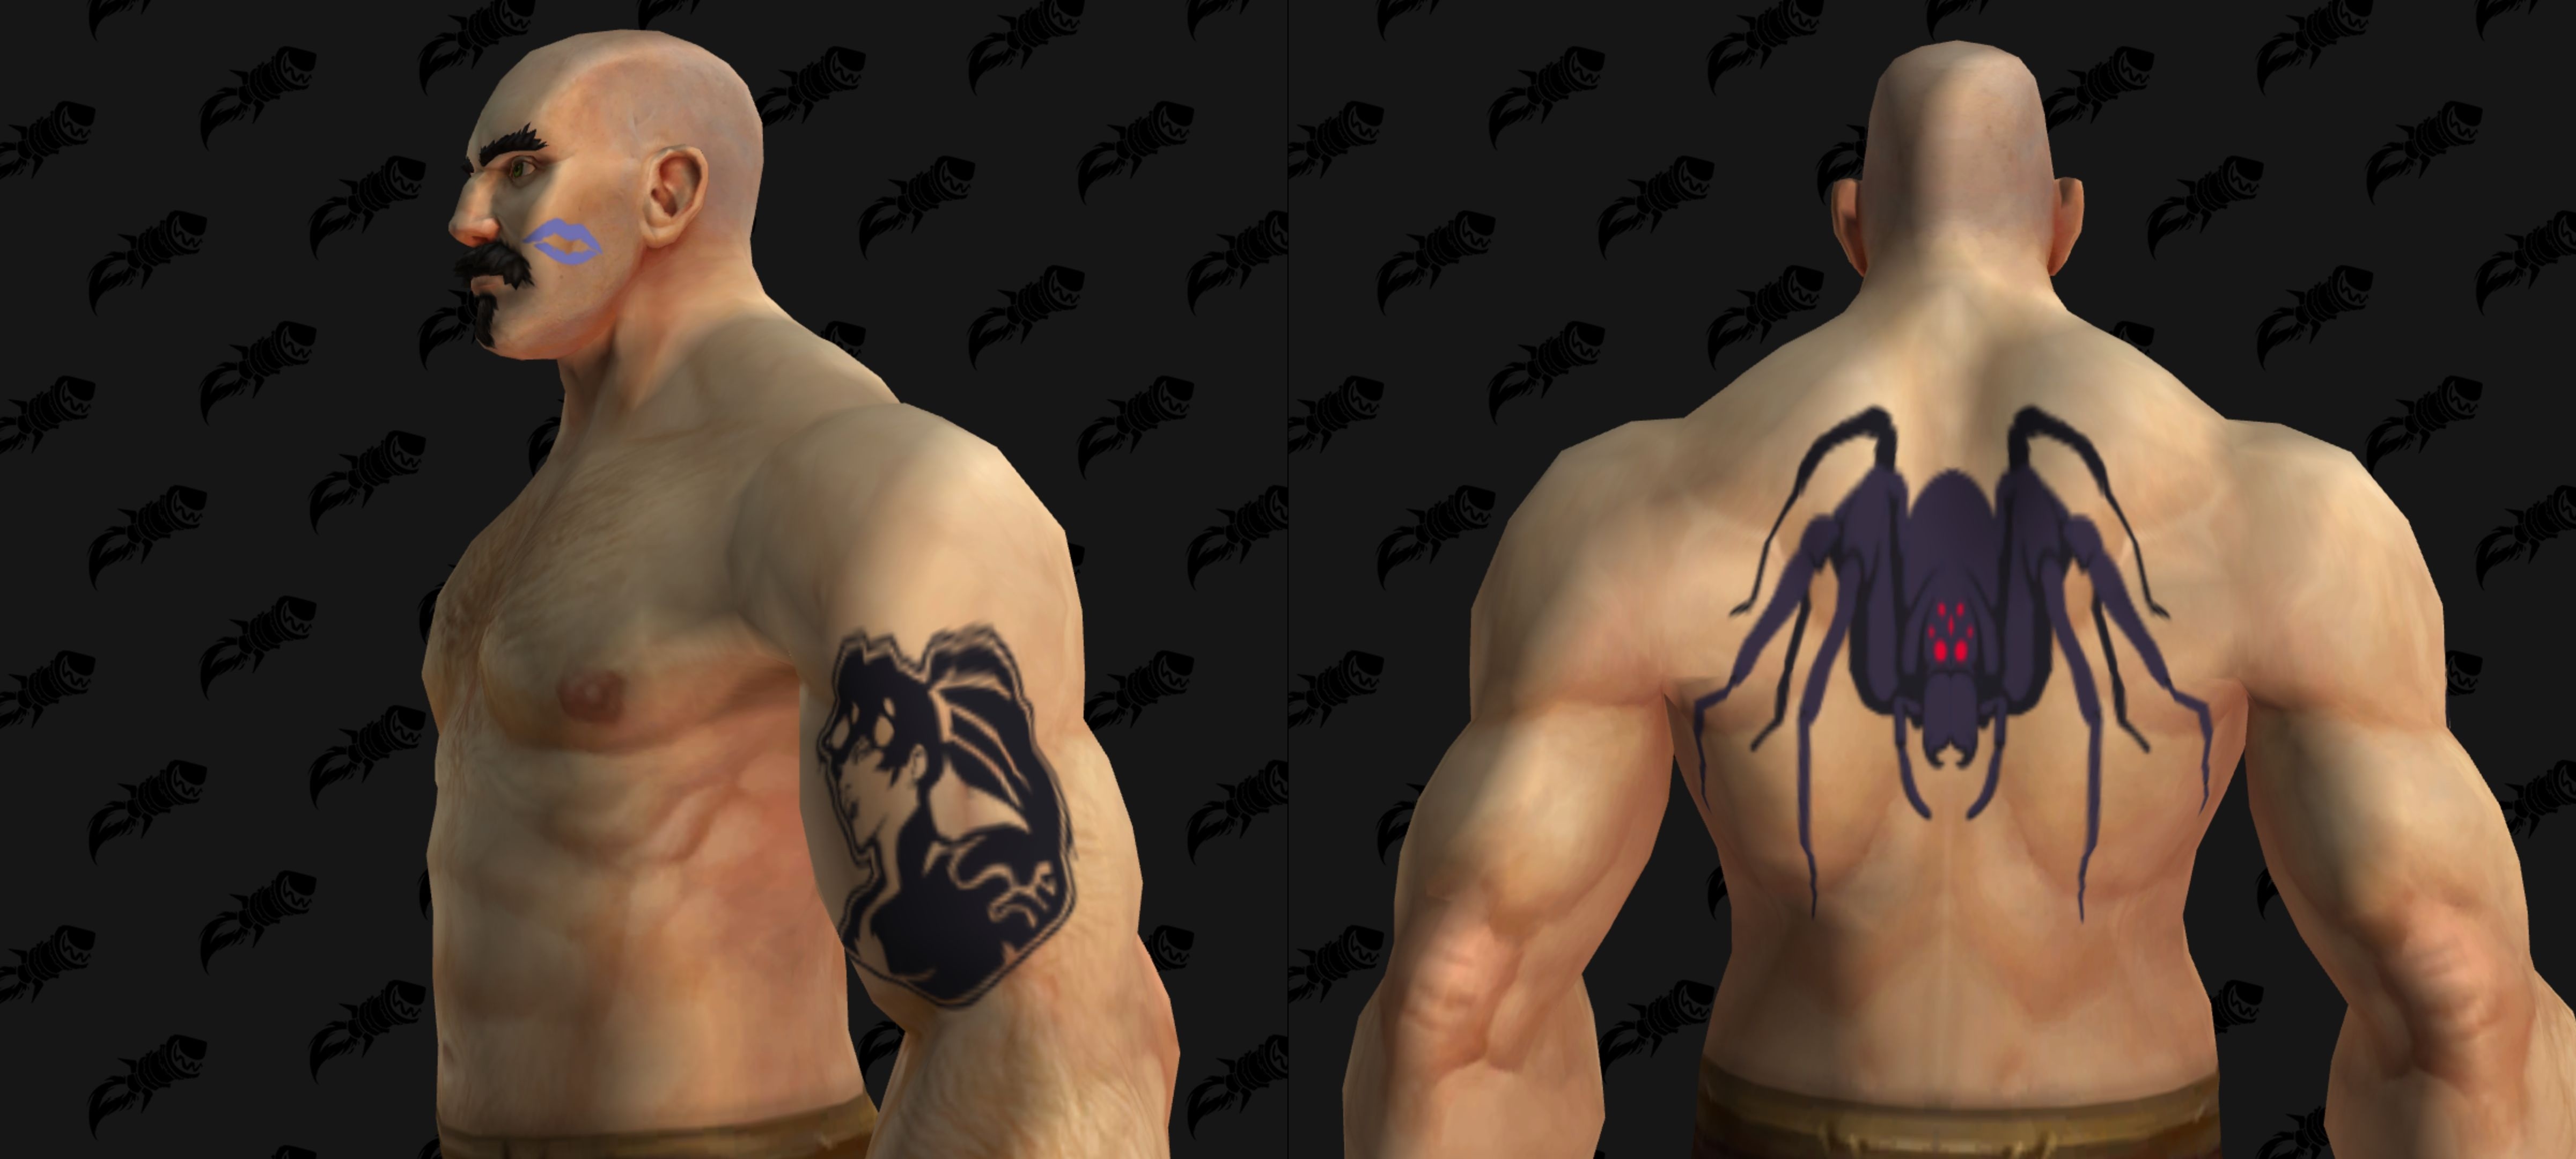 World of Warcraft Tattoo  General Discussion  World of Warcraft Forums